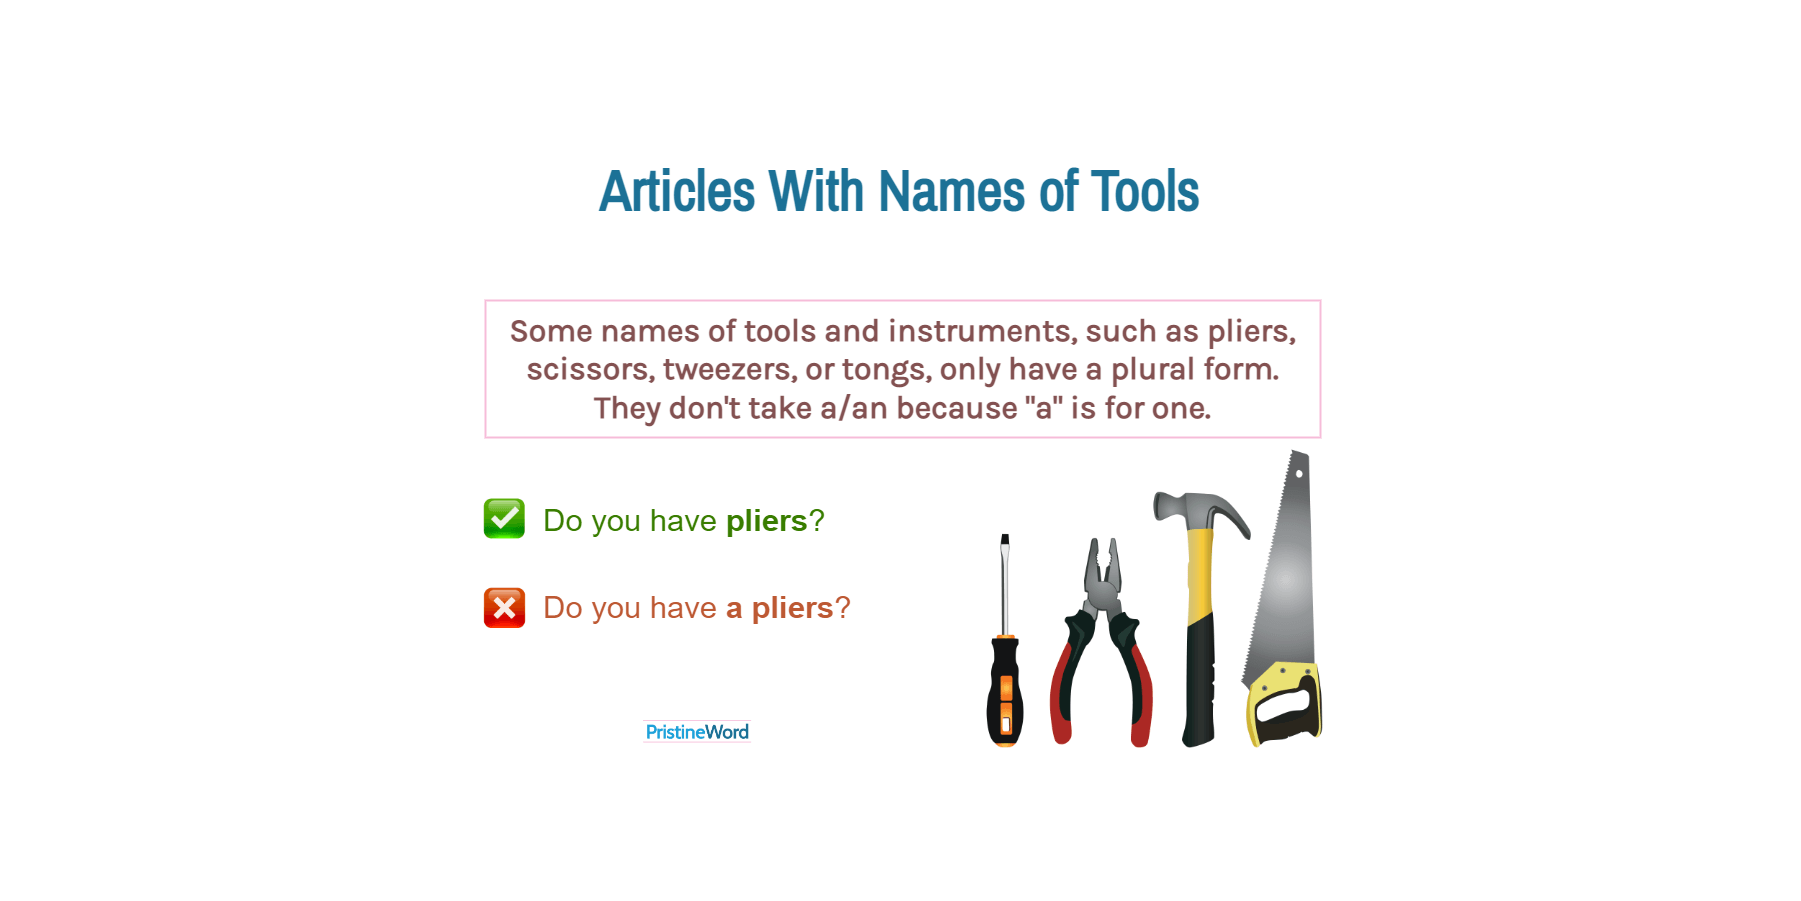 Articles With Names of Tools